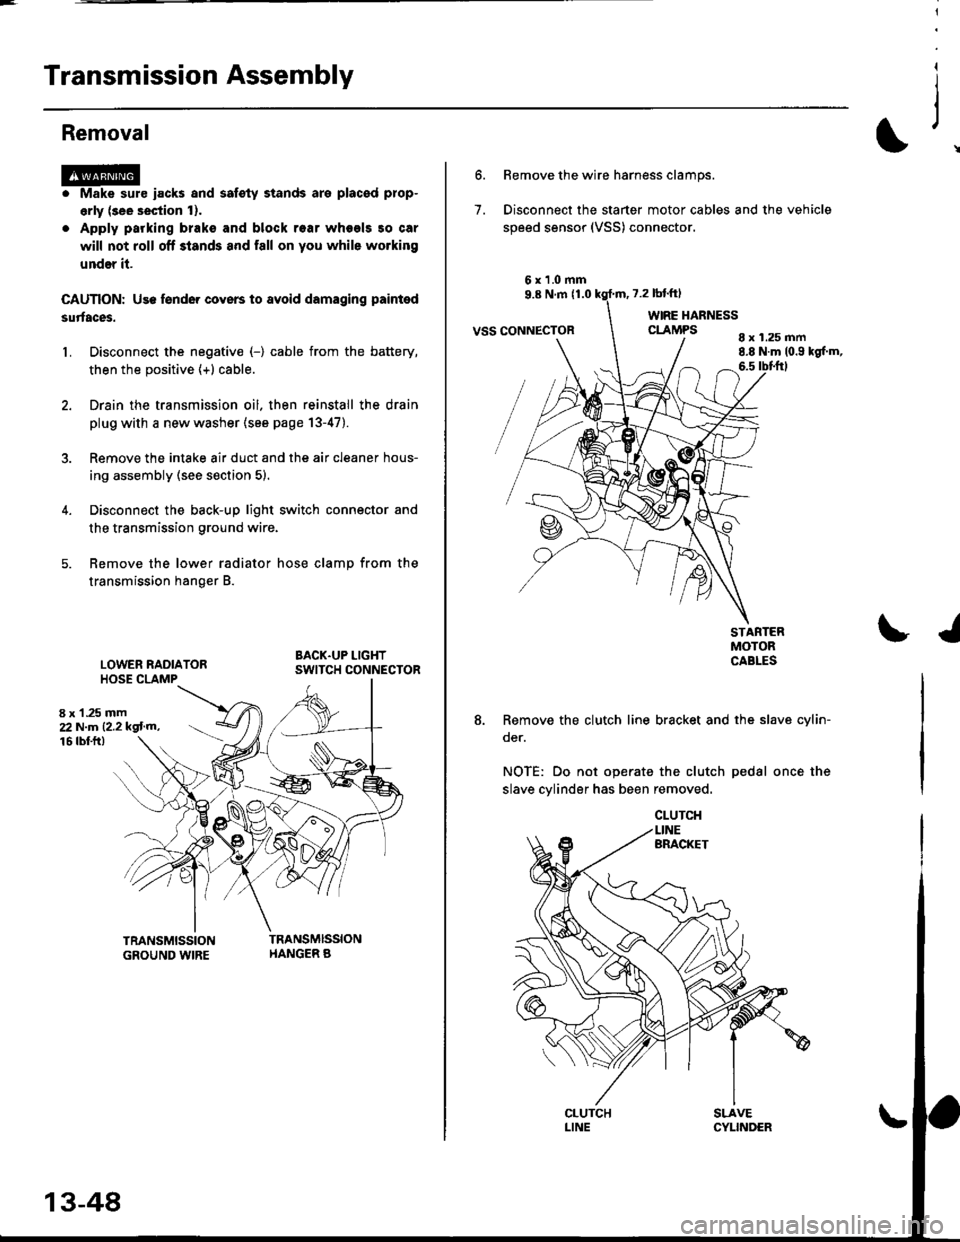 HONDA CIVIC 1996 6.G Repair Manual Transmission Assembly
l
,
{
Removal
@Make sure iacks and safoty stands are placad plop-
erly (3ee section l).
Apply parking braks and block rear wheels so car
will not roll off stands and fall on you 